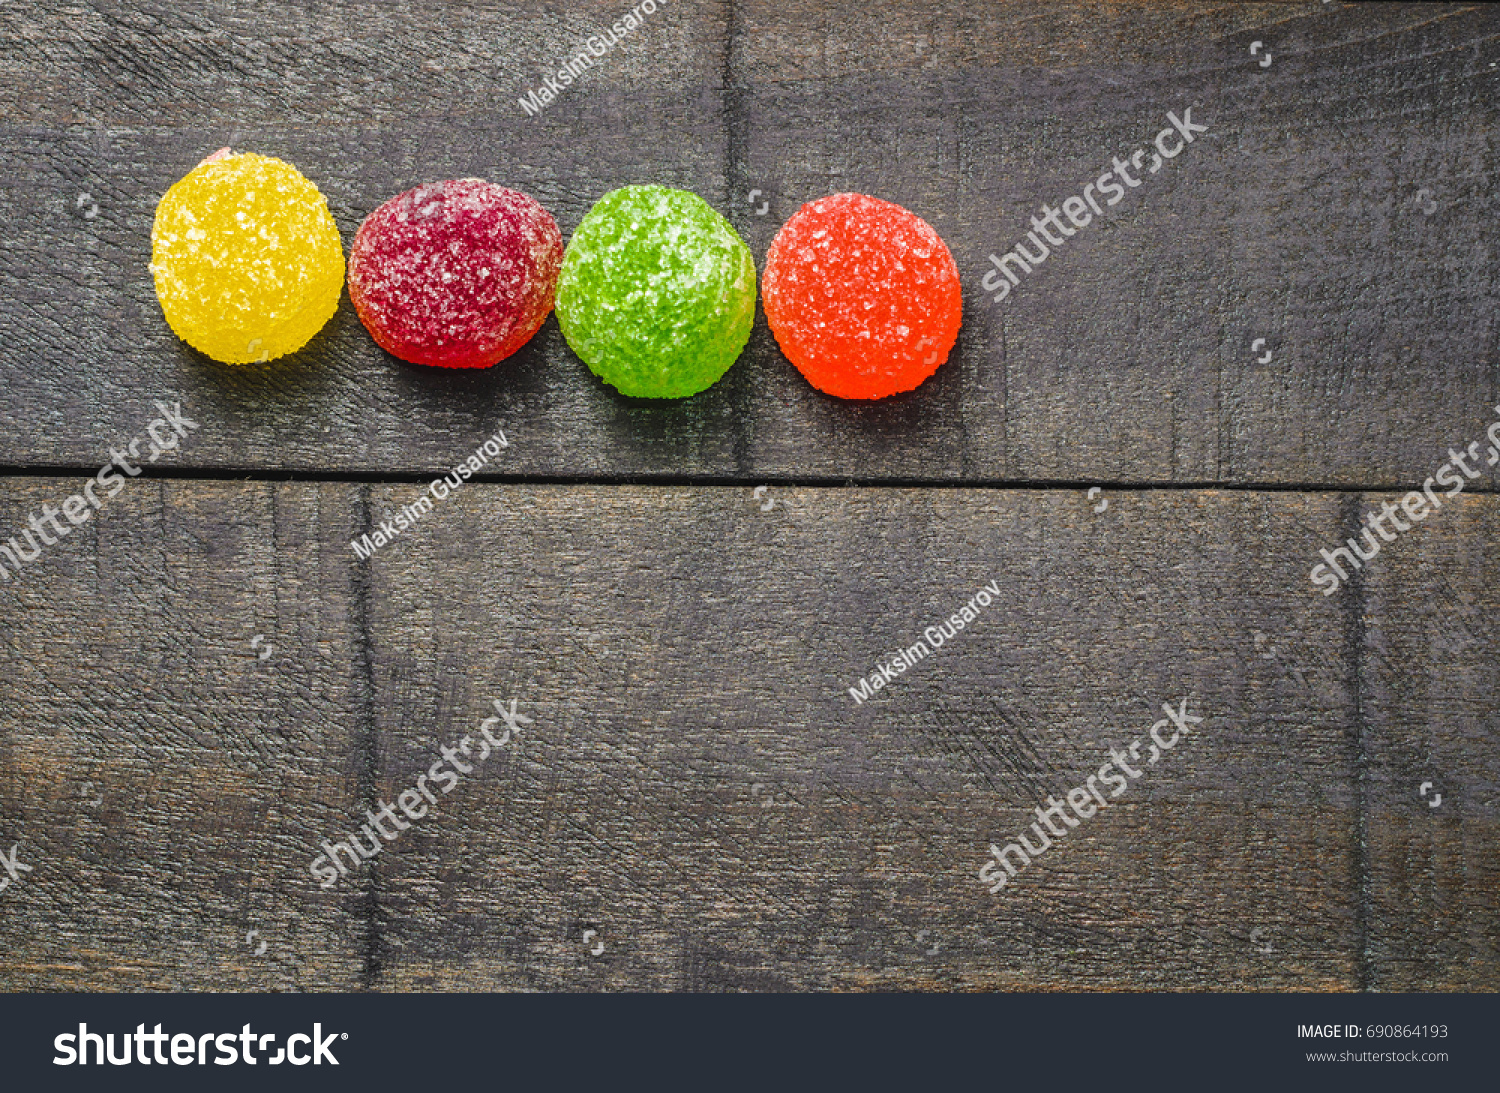 Bright colored candy, sweets, sweets on a dark background, top view #690864193